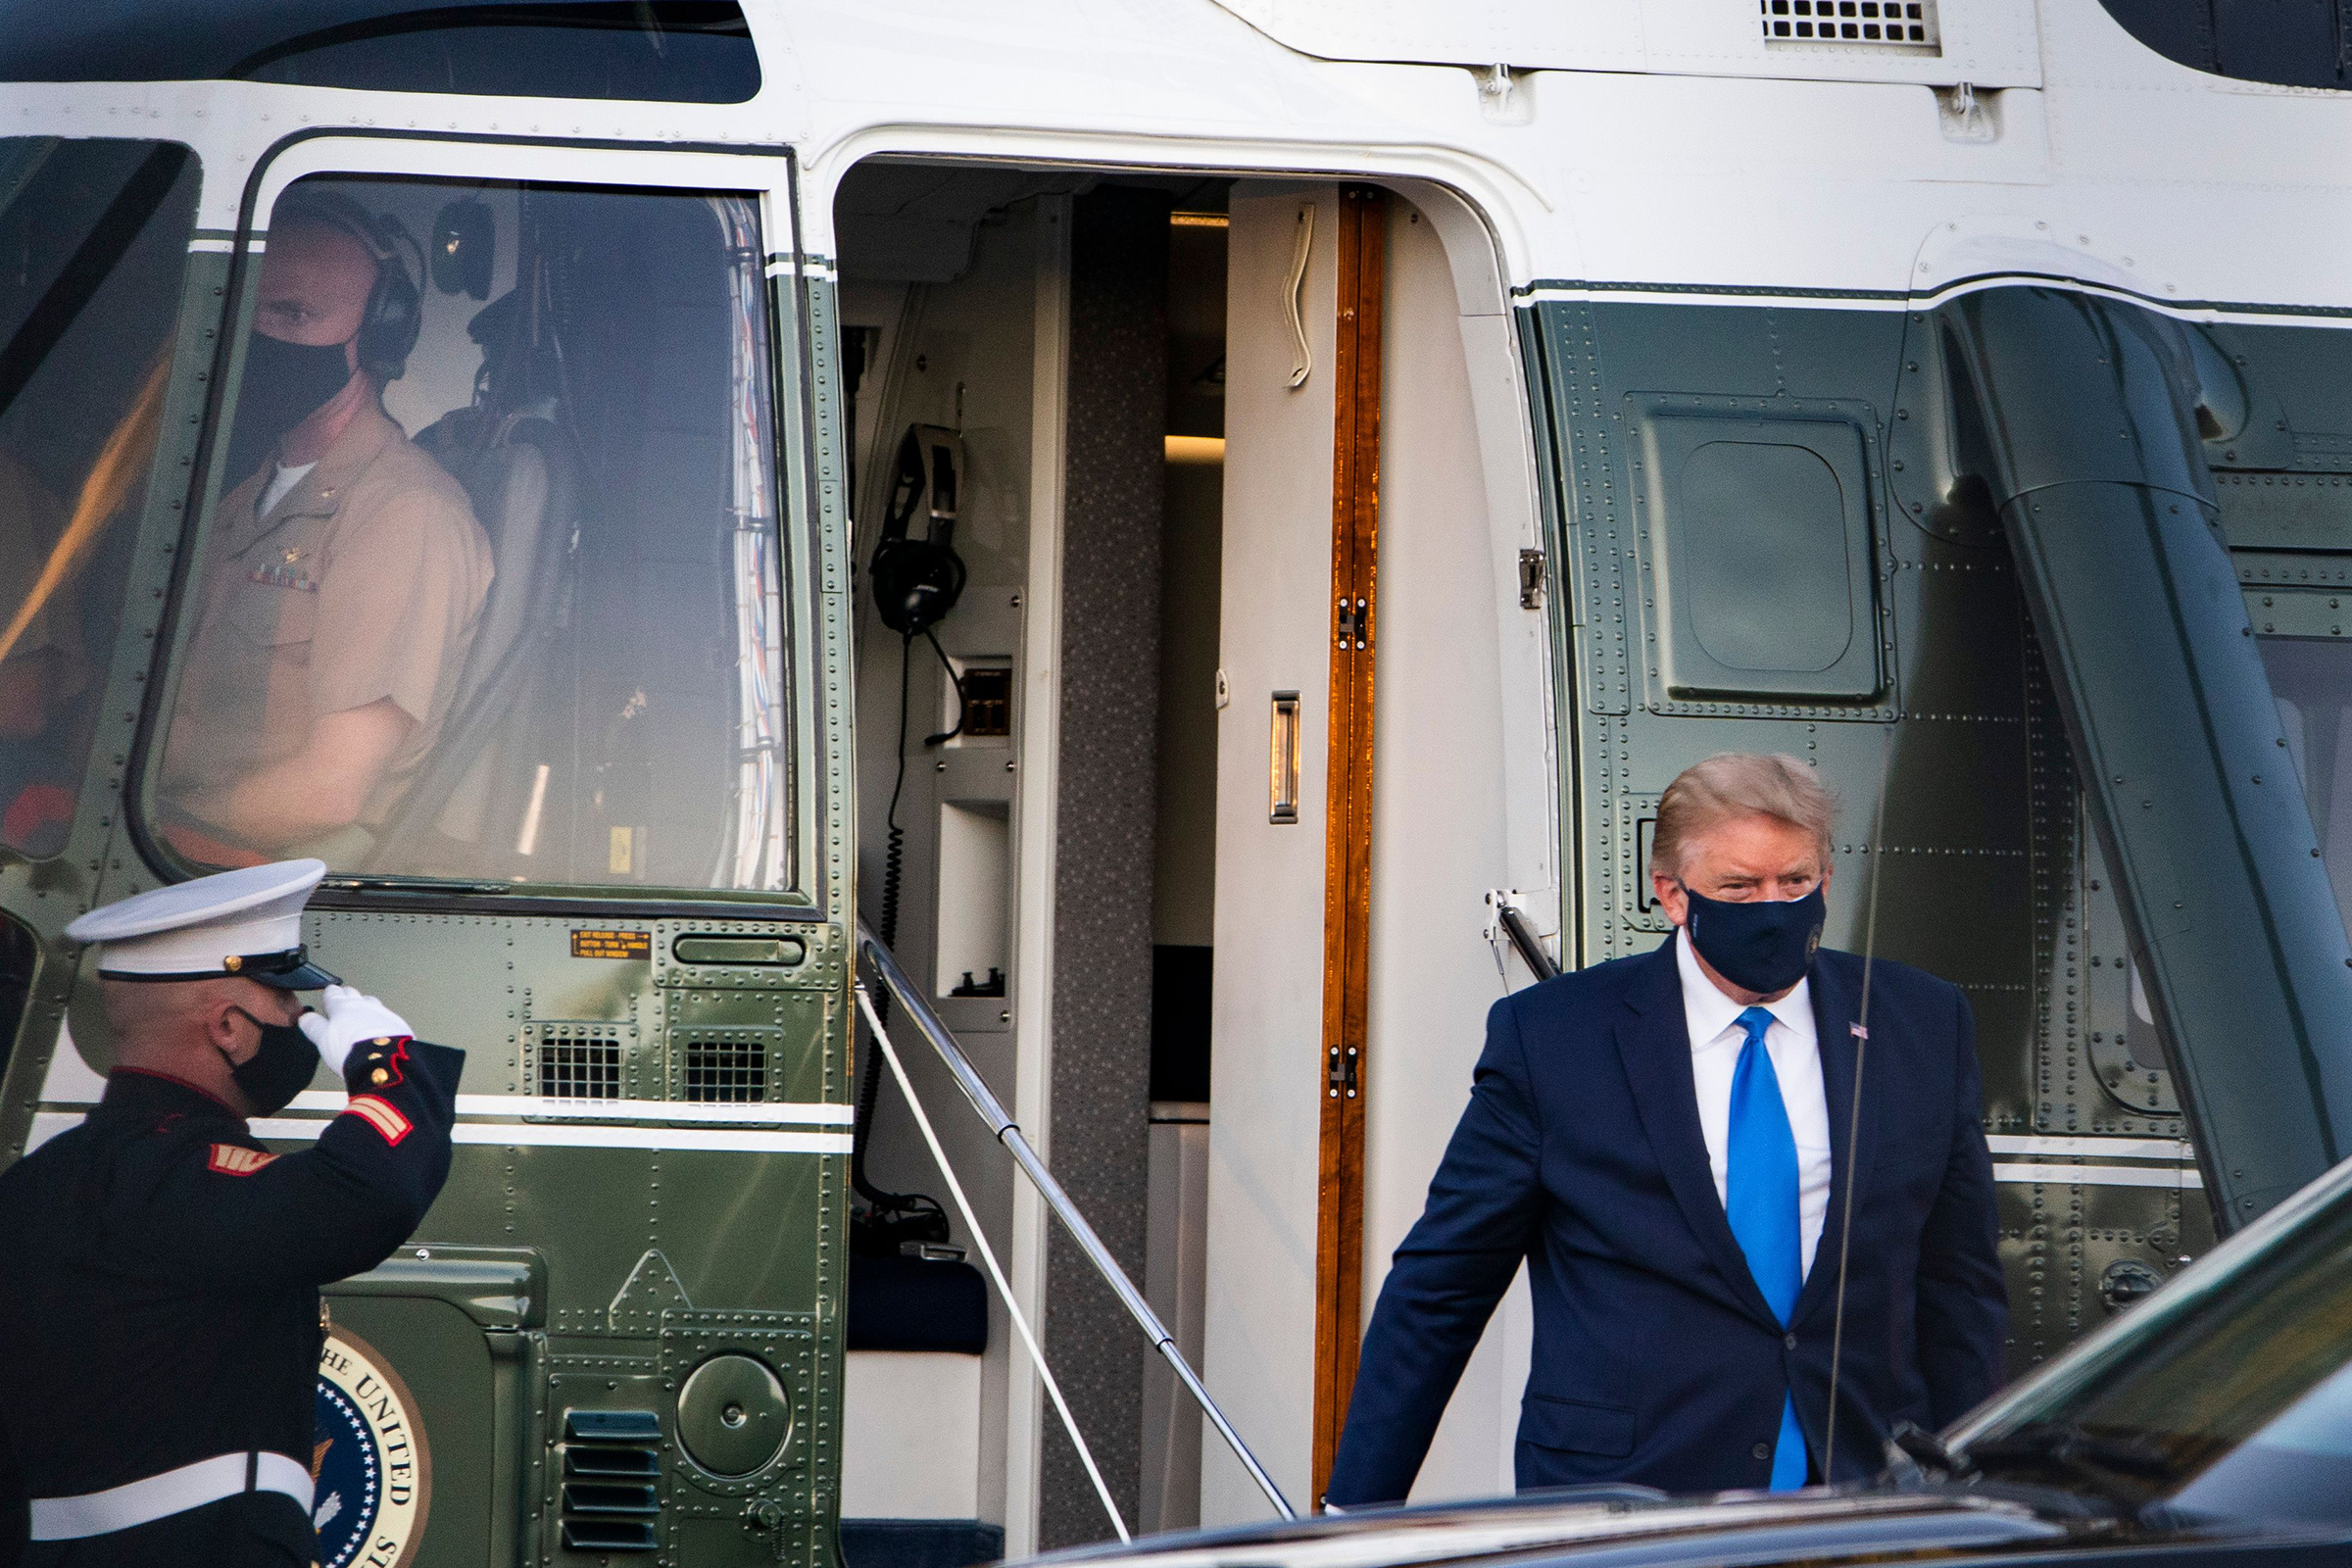 President Trump walks off Marine One after landing at Walter Reed National Military Medical Center in Bethesda, Md., on Oct. 2, 2020. His positive COVID-19 test comes after months of playing down the severity of the pandemic that has killed 207,000 Americans.